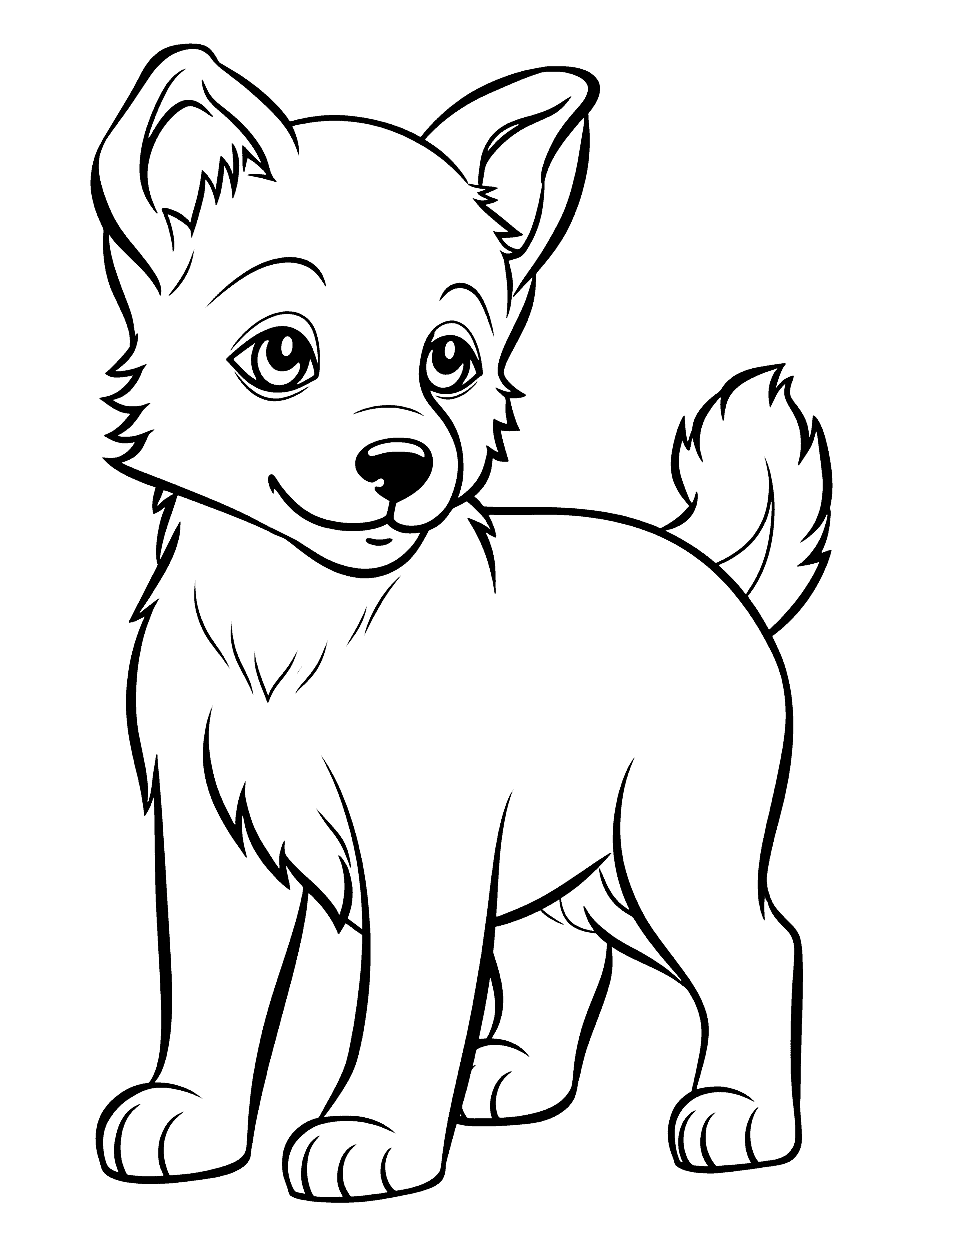 Sleek and Smooth Easy-to-Color Husky Puppy Coloring Page - An easy-to-color image of a sleek Husky puppy.